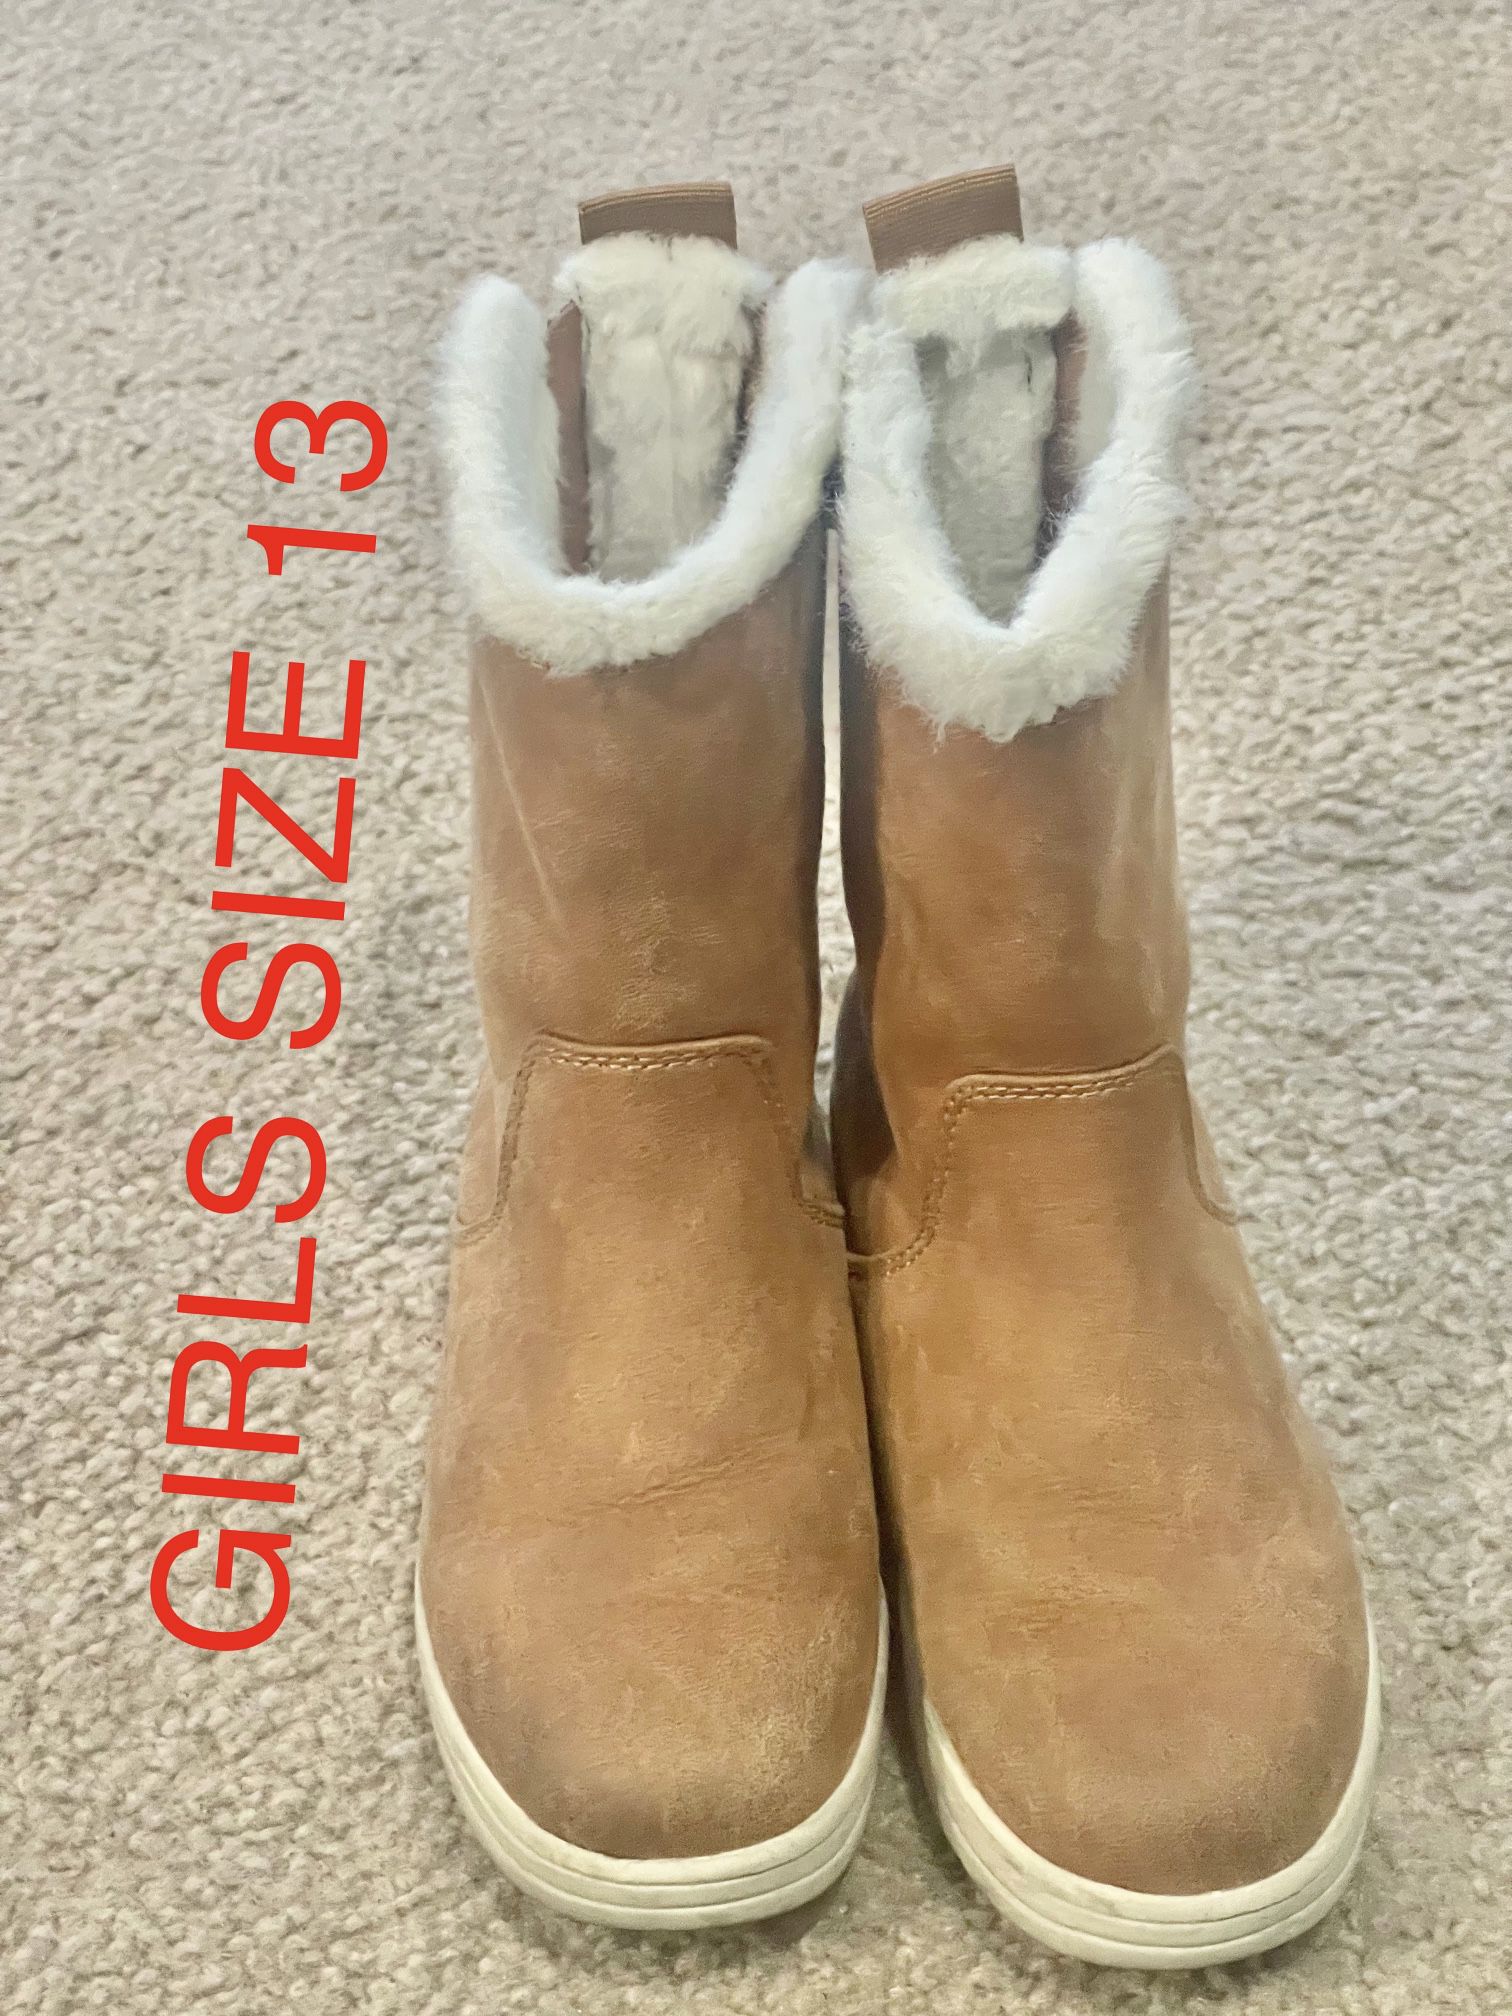 Girls Boots Size 13.  GOOD CONDITION                             NO TRADES.     NO SHIPPING.    FIRM.    $7.   (EAST PALMDALE) 